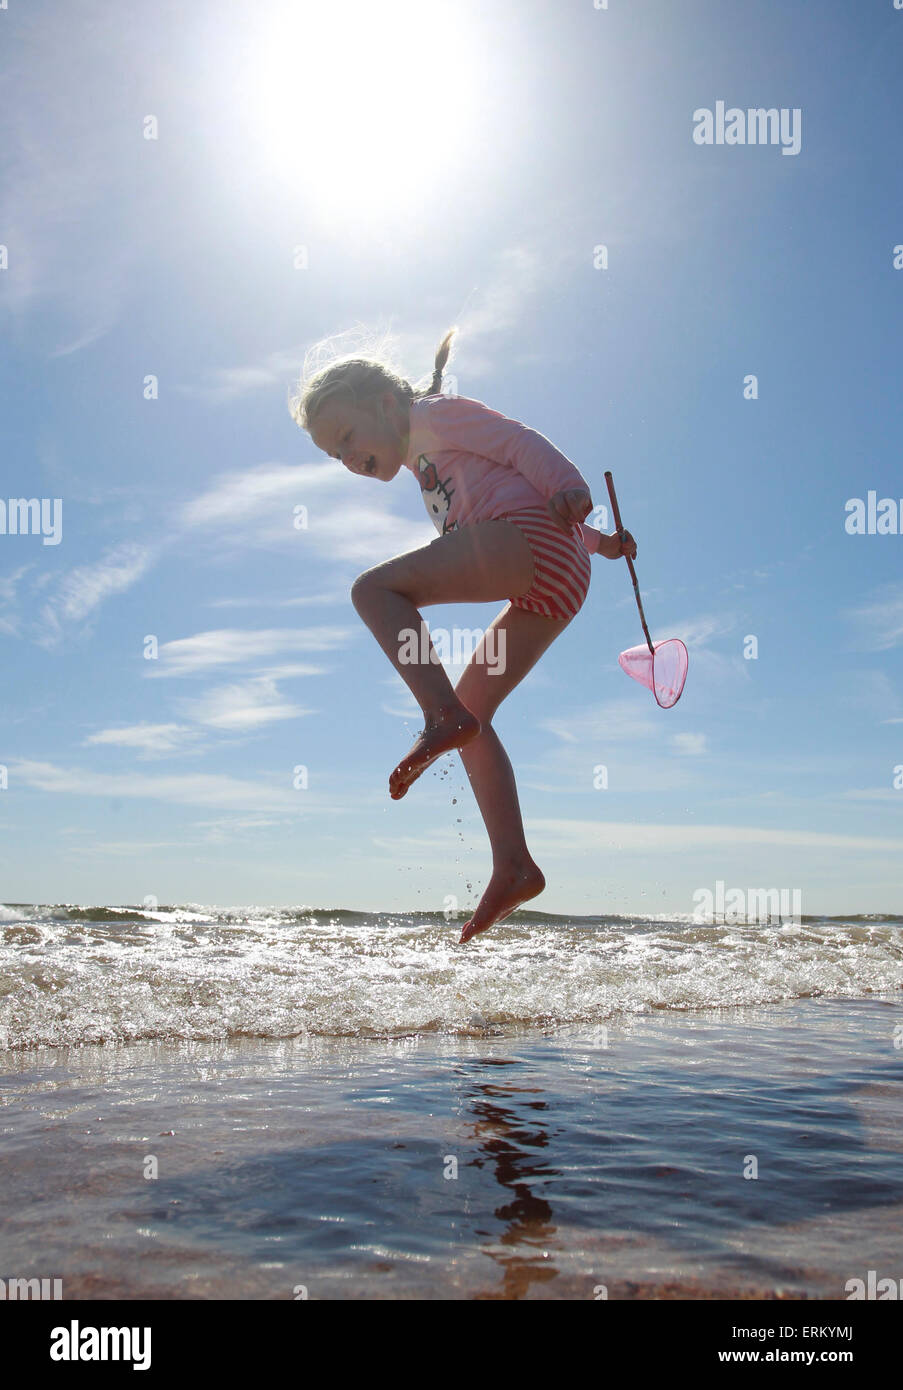 Alnmouth Beach, Northumberland, UK. 4th June, 2015. UK Weather: Frances Tidswell-Thompson (7) jumping waves on Alnmouth Beach Northumberland. Credit:  West Yorkshire Images/Alamy Live News Stock Photo